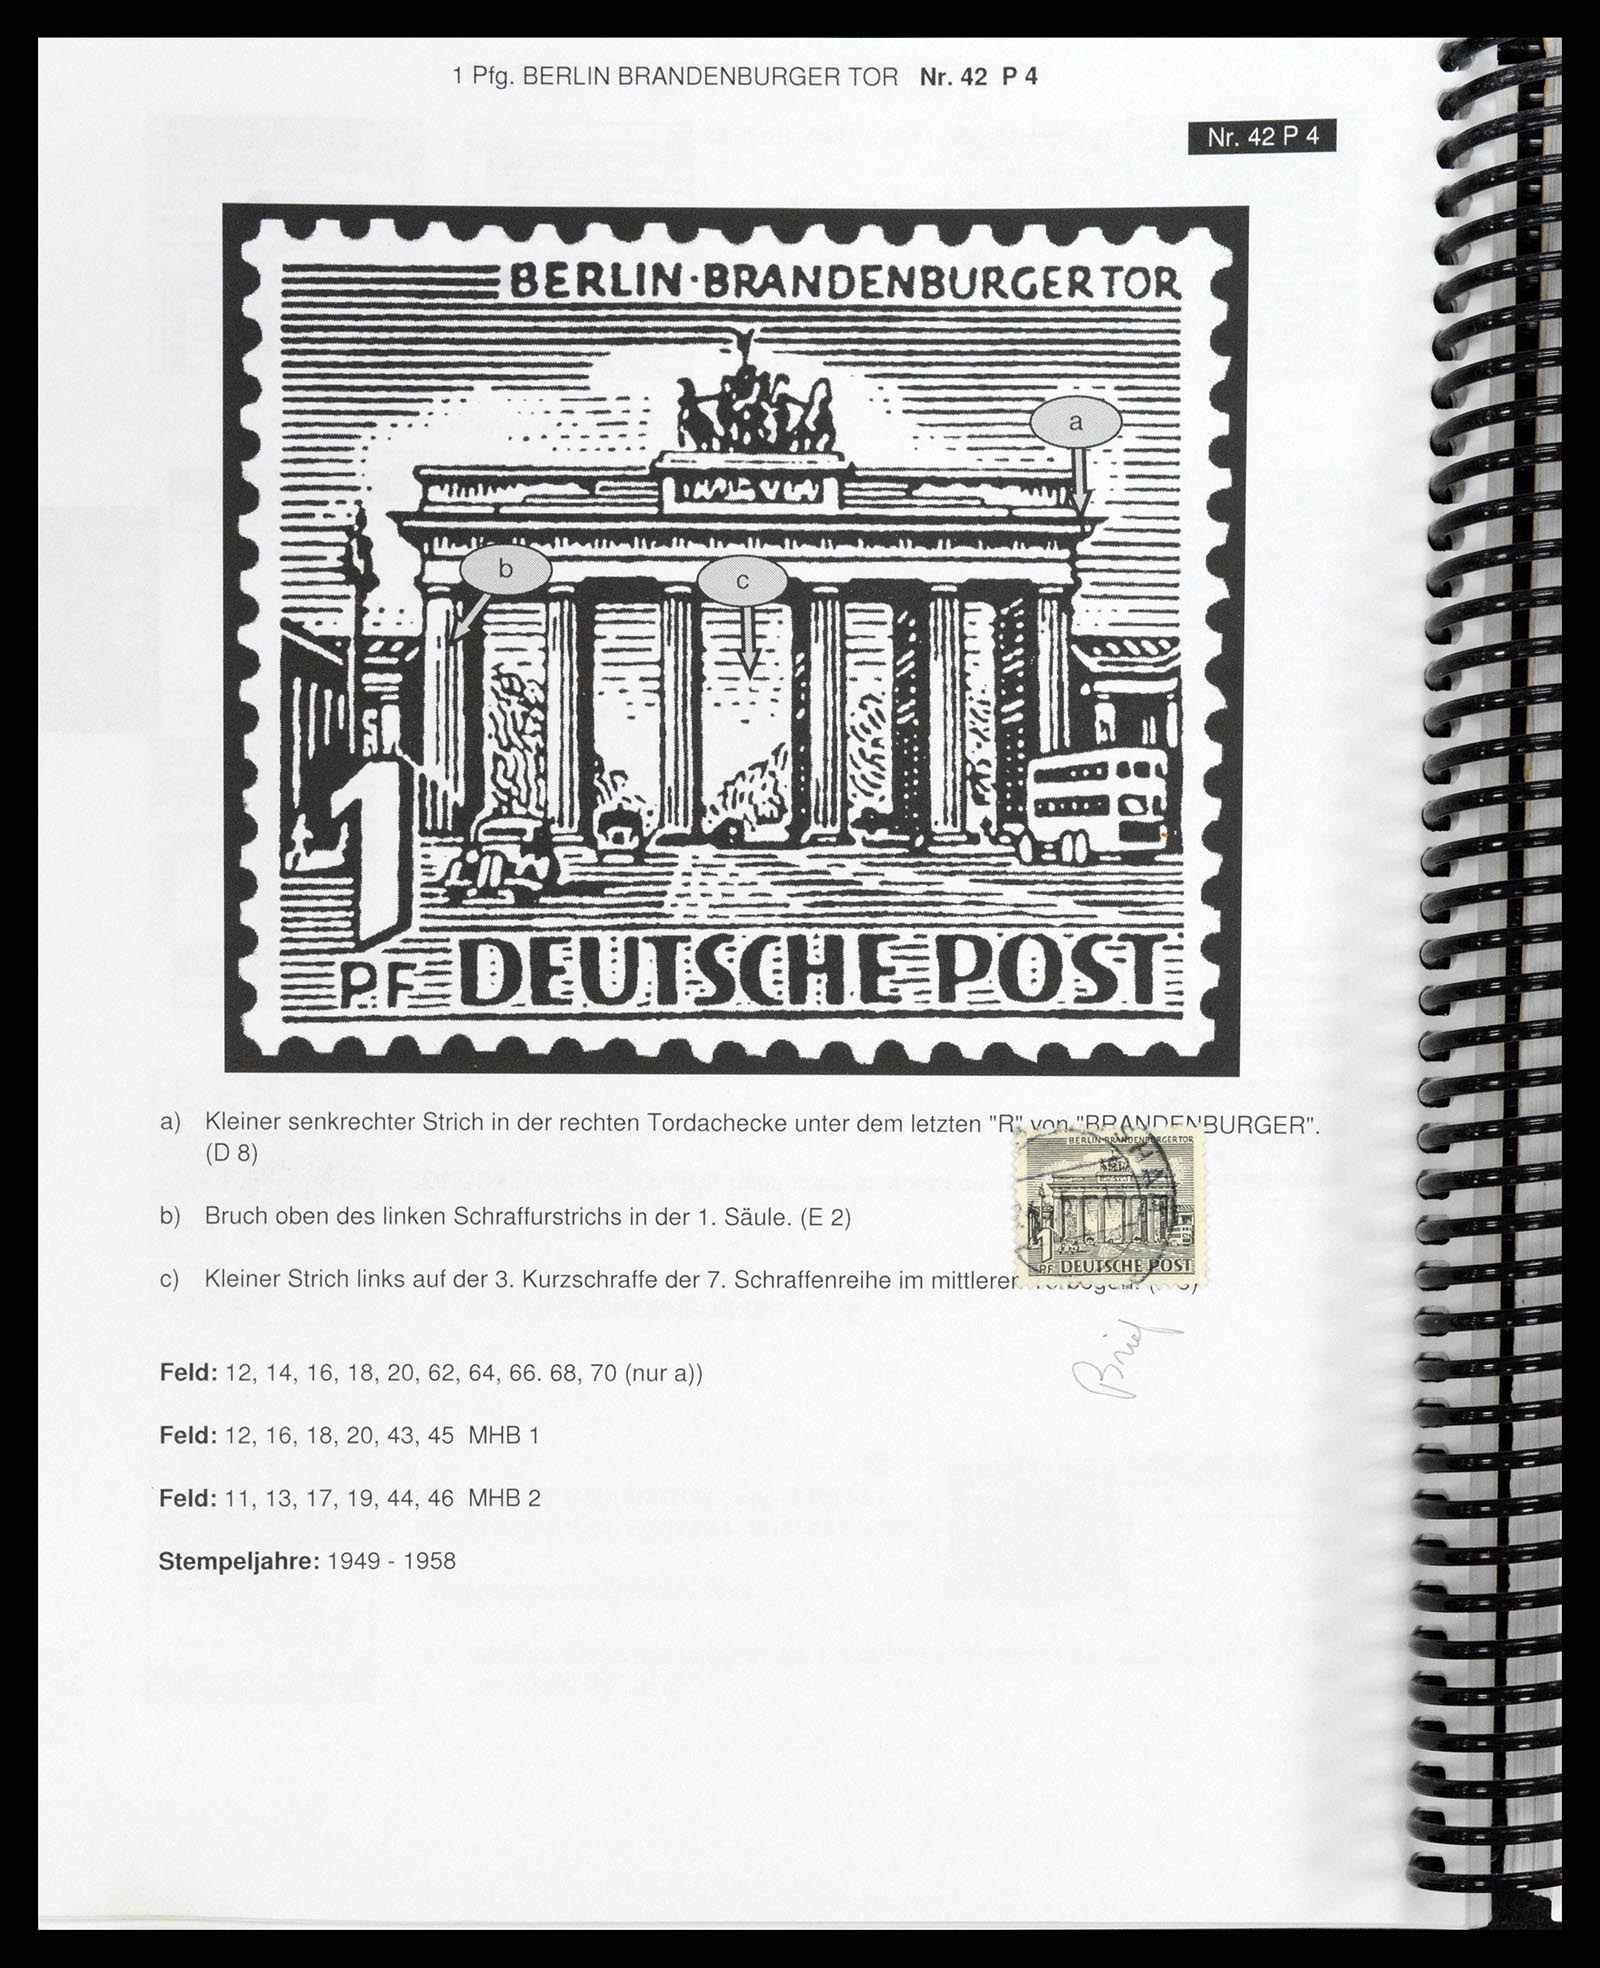 37458 037 - Stamp collection 37458 Berlin plateflaws 1949.